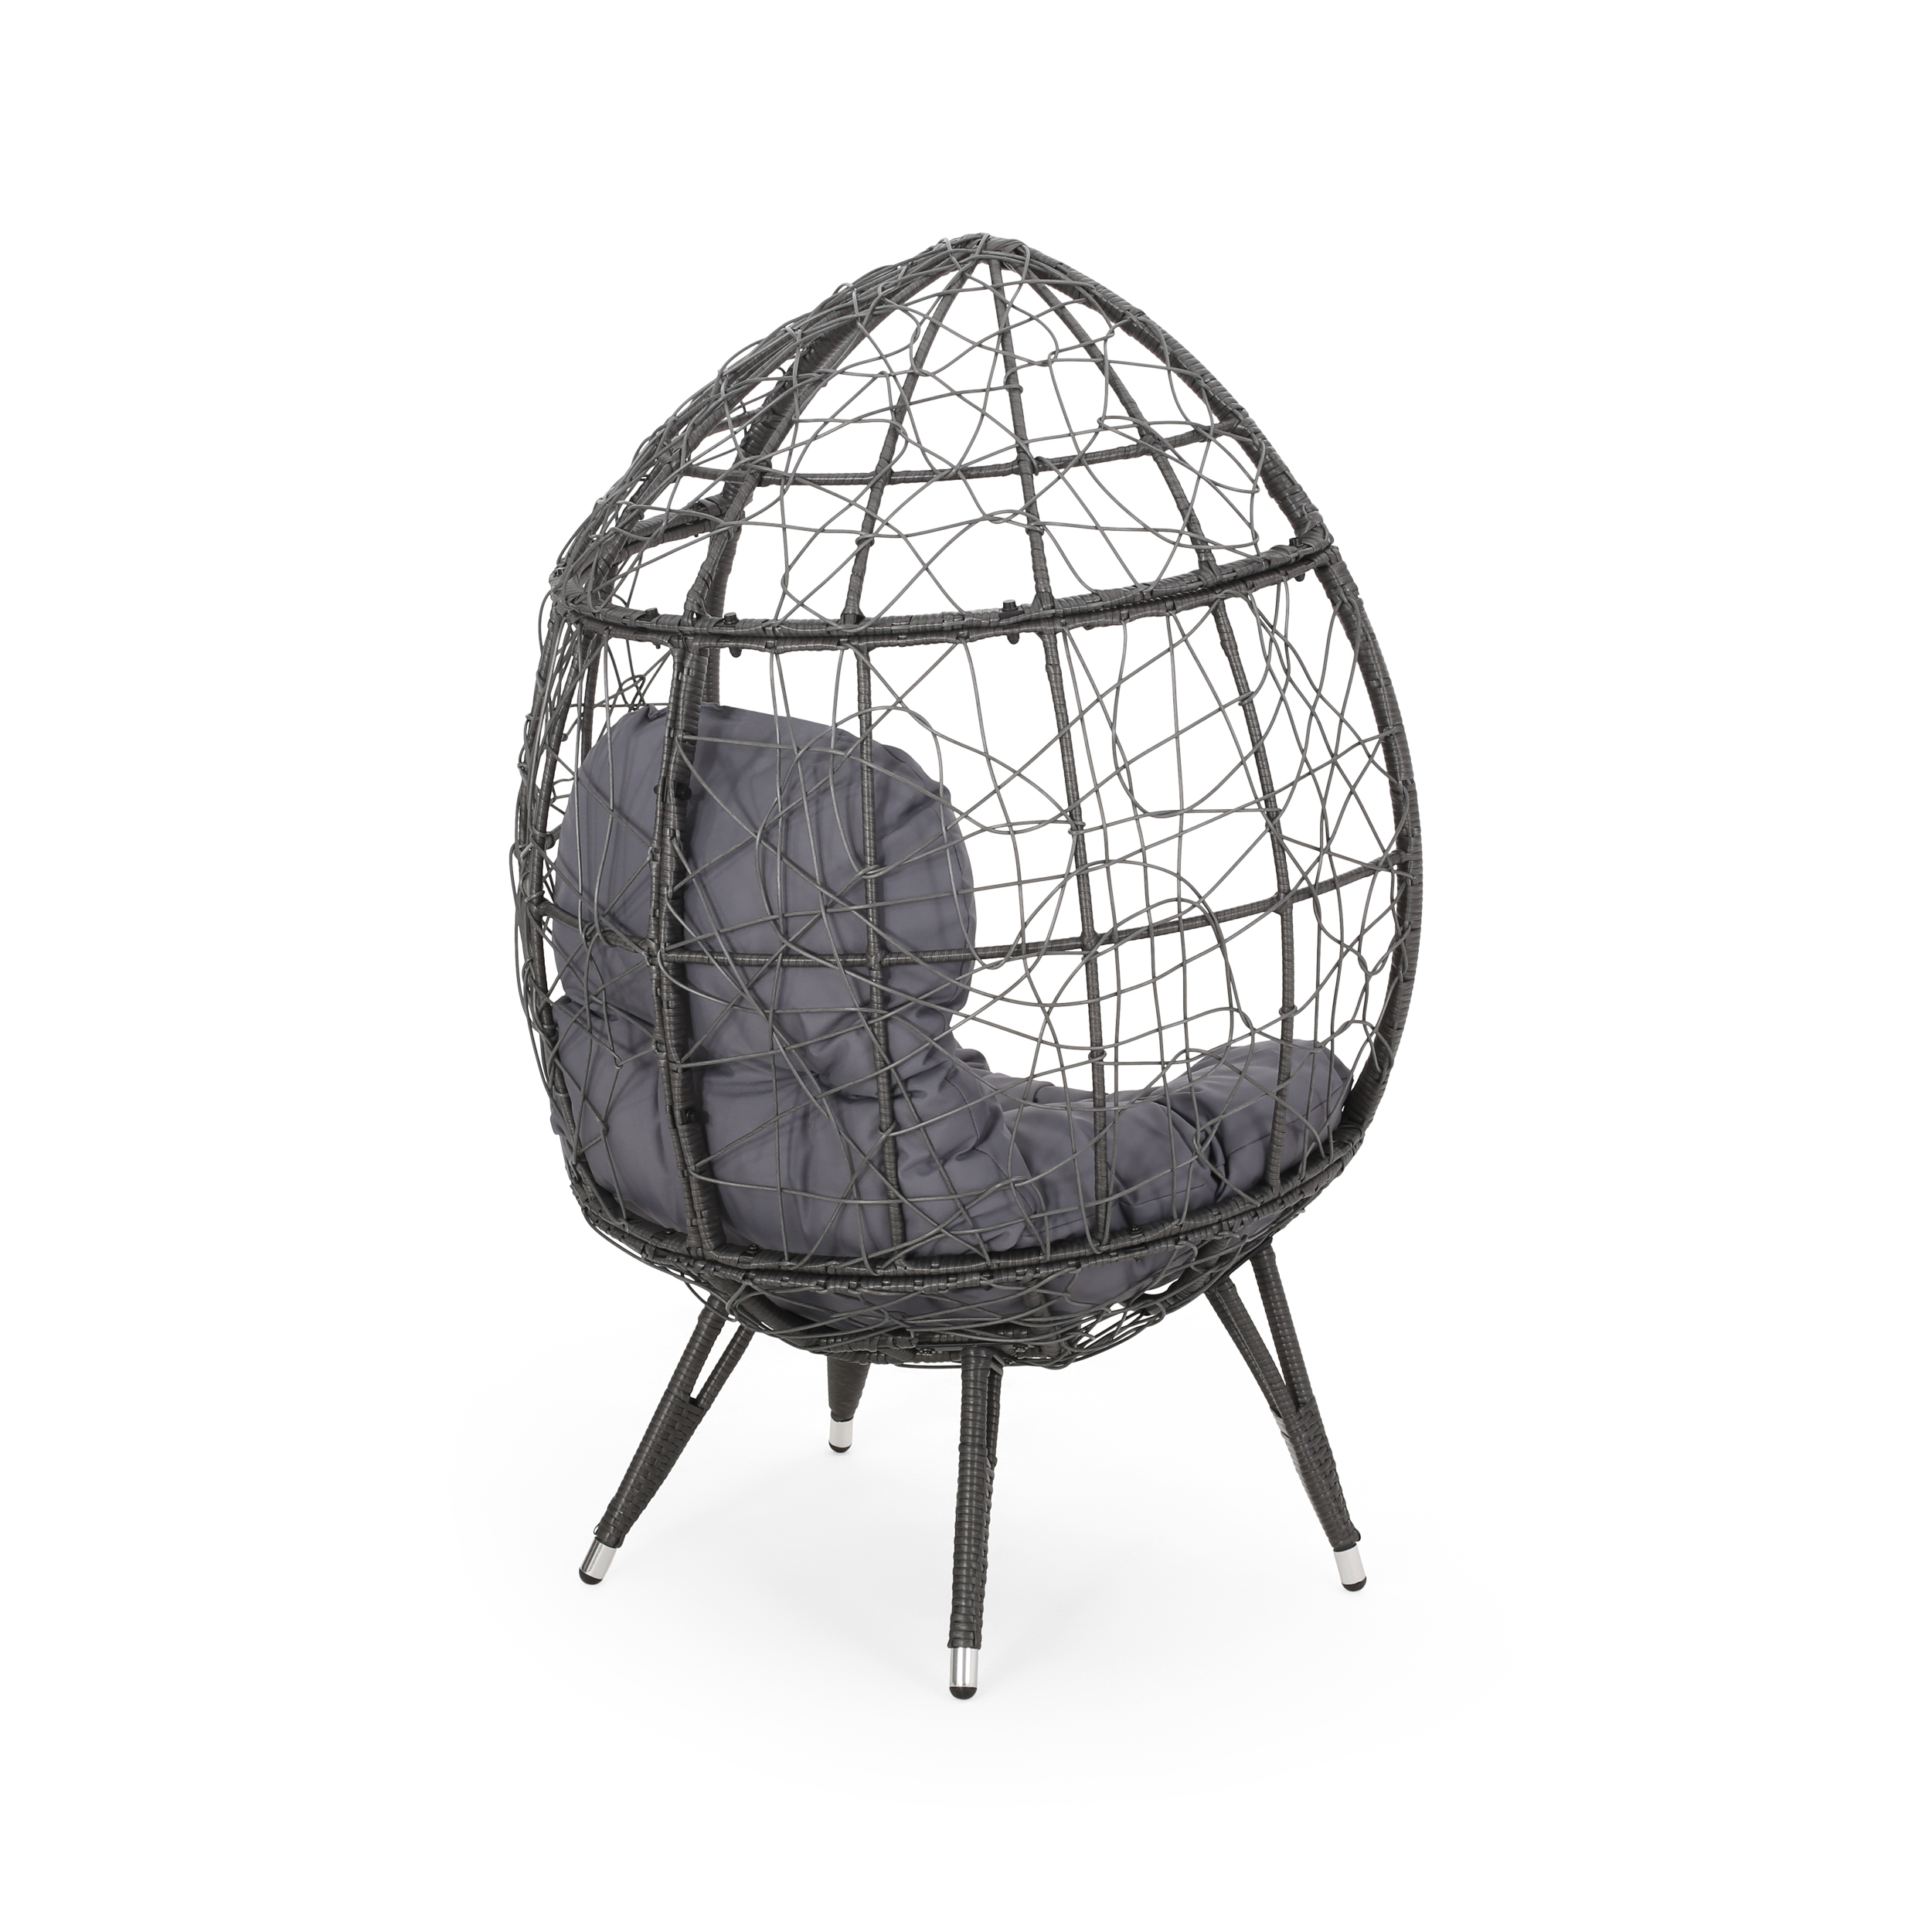 Keondre Indoor Wicker Teardrop Chair with Cushion, Gray and Dark Gray - image 4 of 11